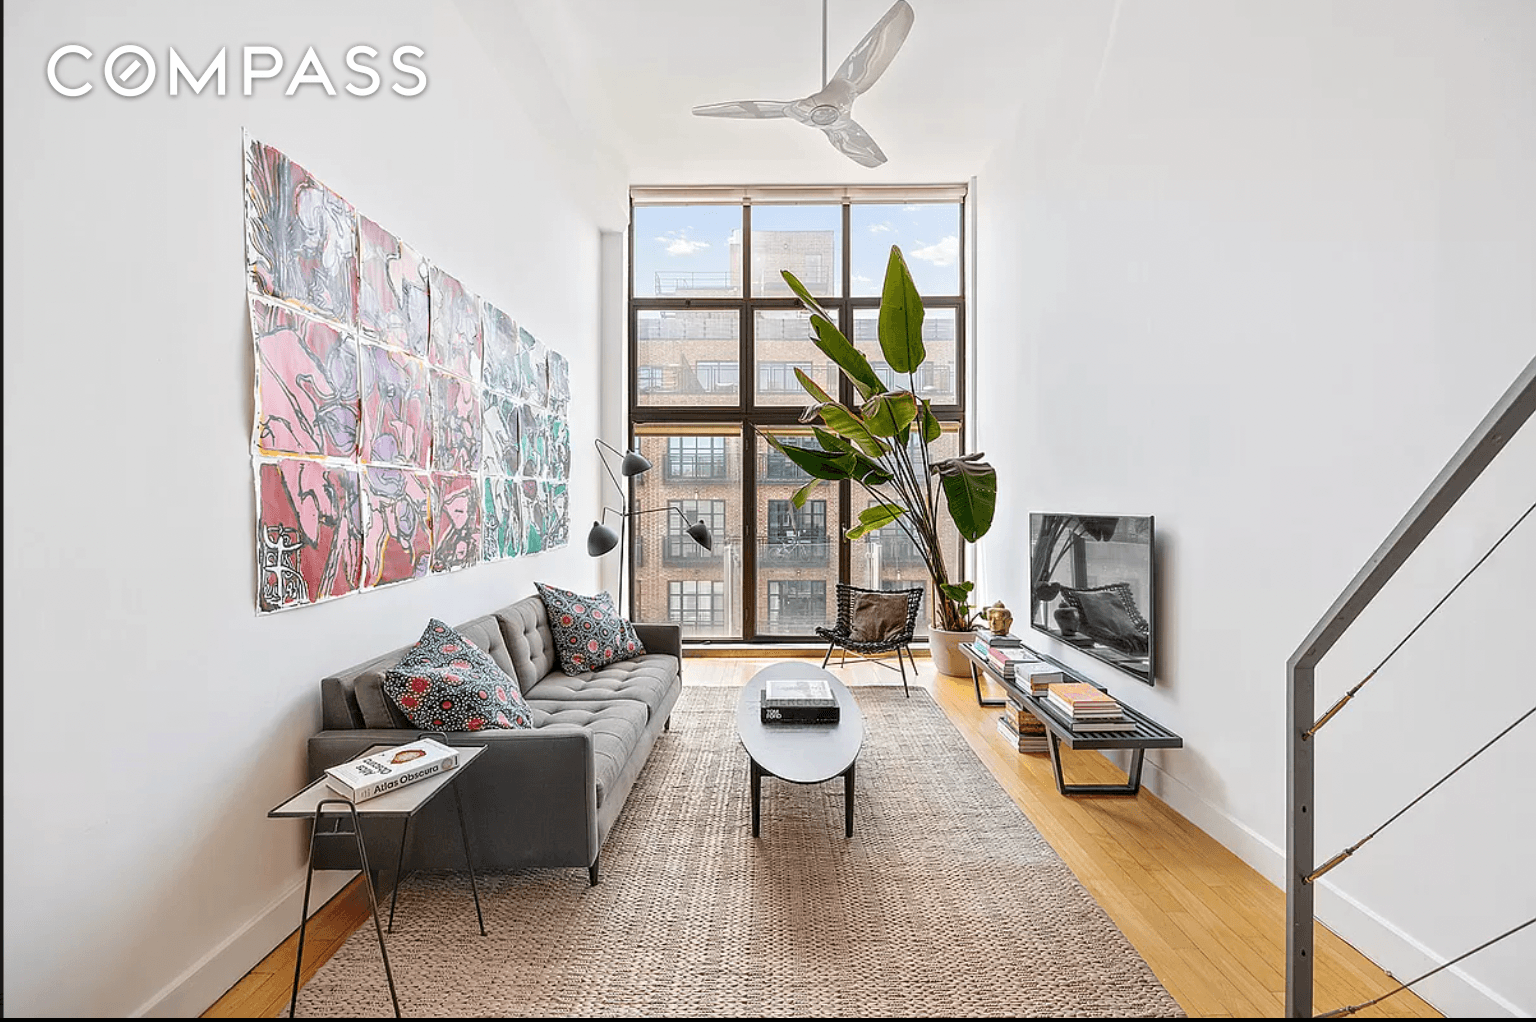 A rare opportunity to own a spacious, loft style, convertible two bedroom two bathroom plus home office with 14 foot high ceilings and amazing sunlight located in prime Williamsburg, steps ...